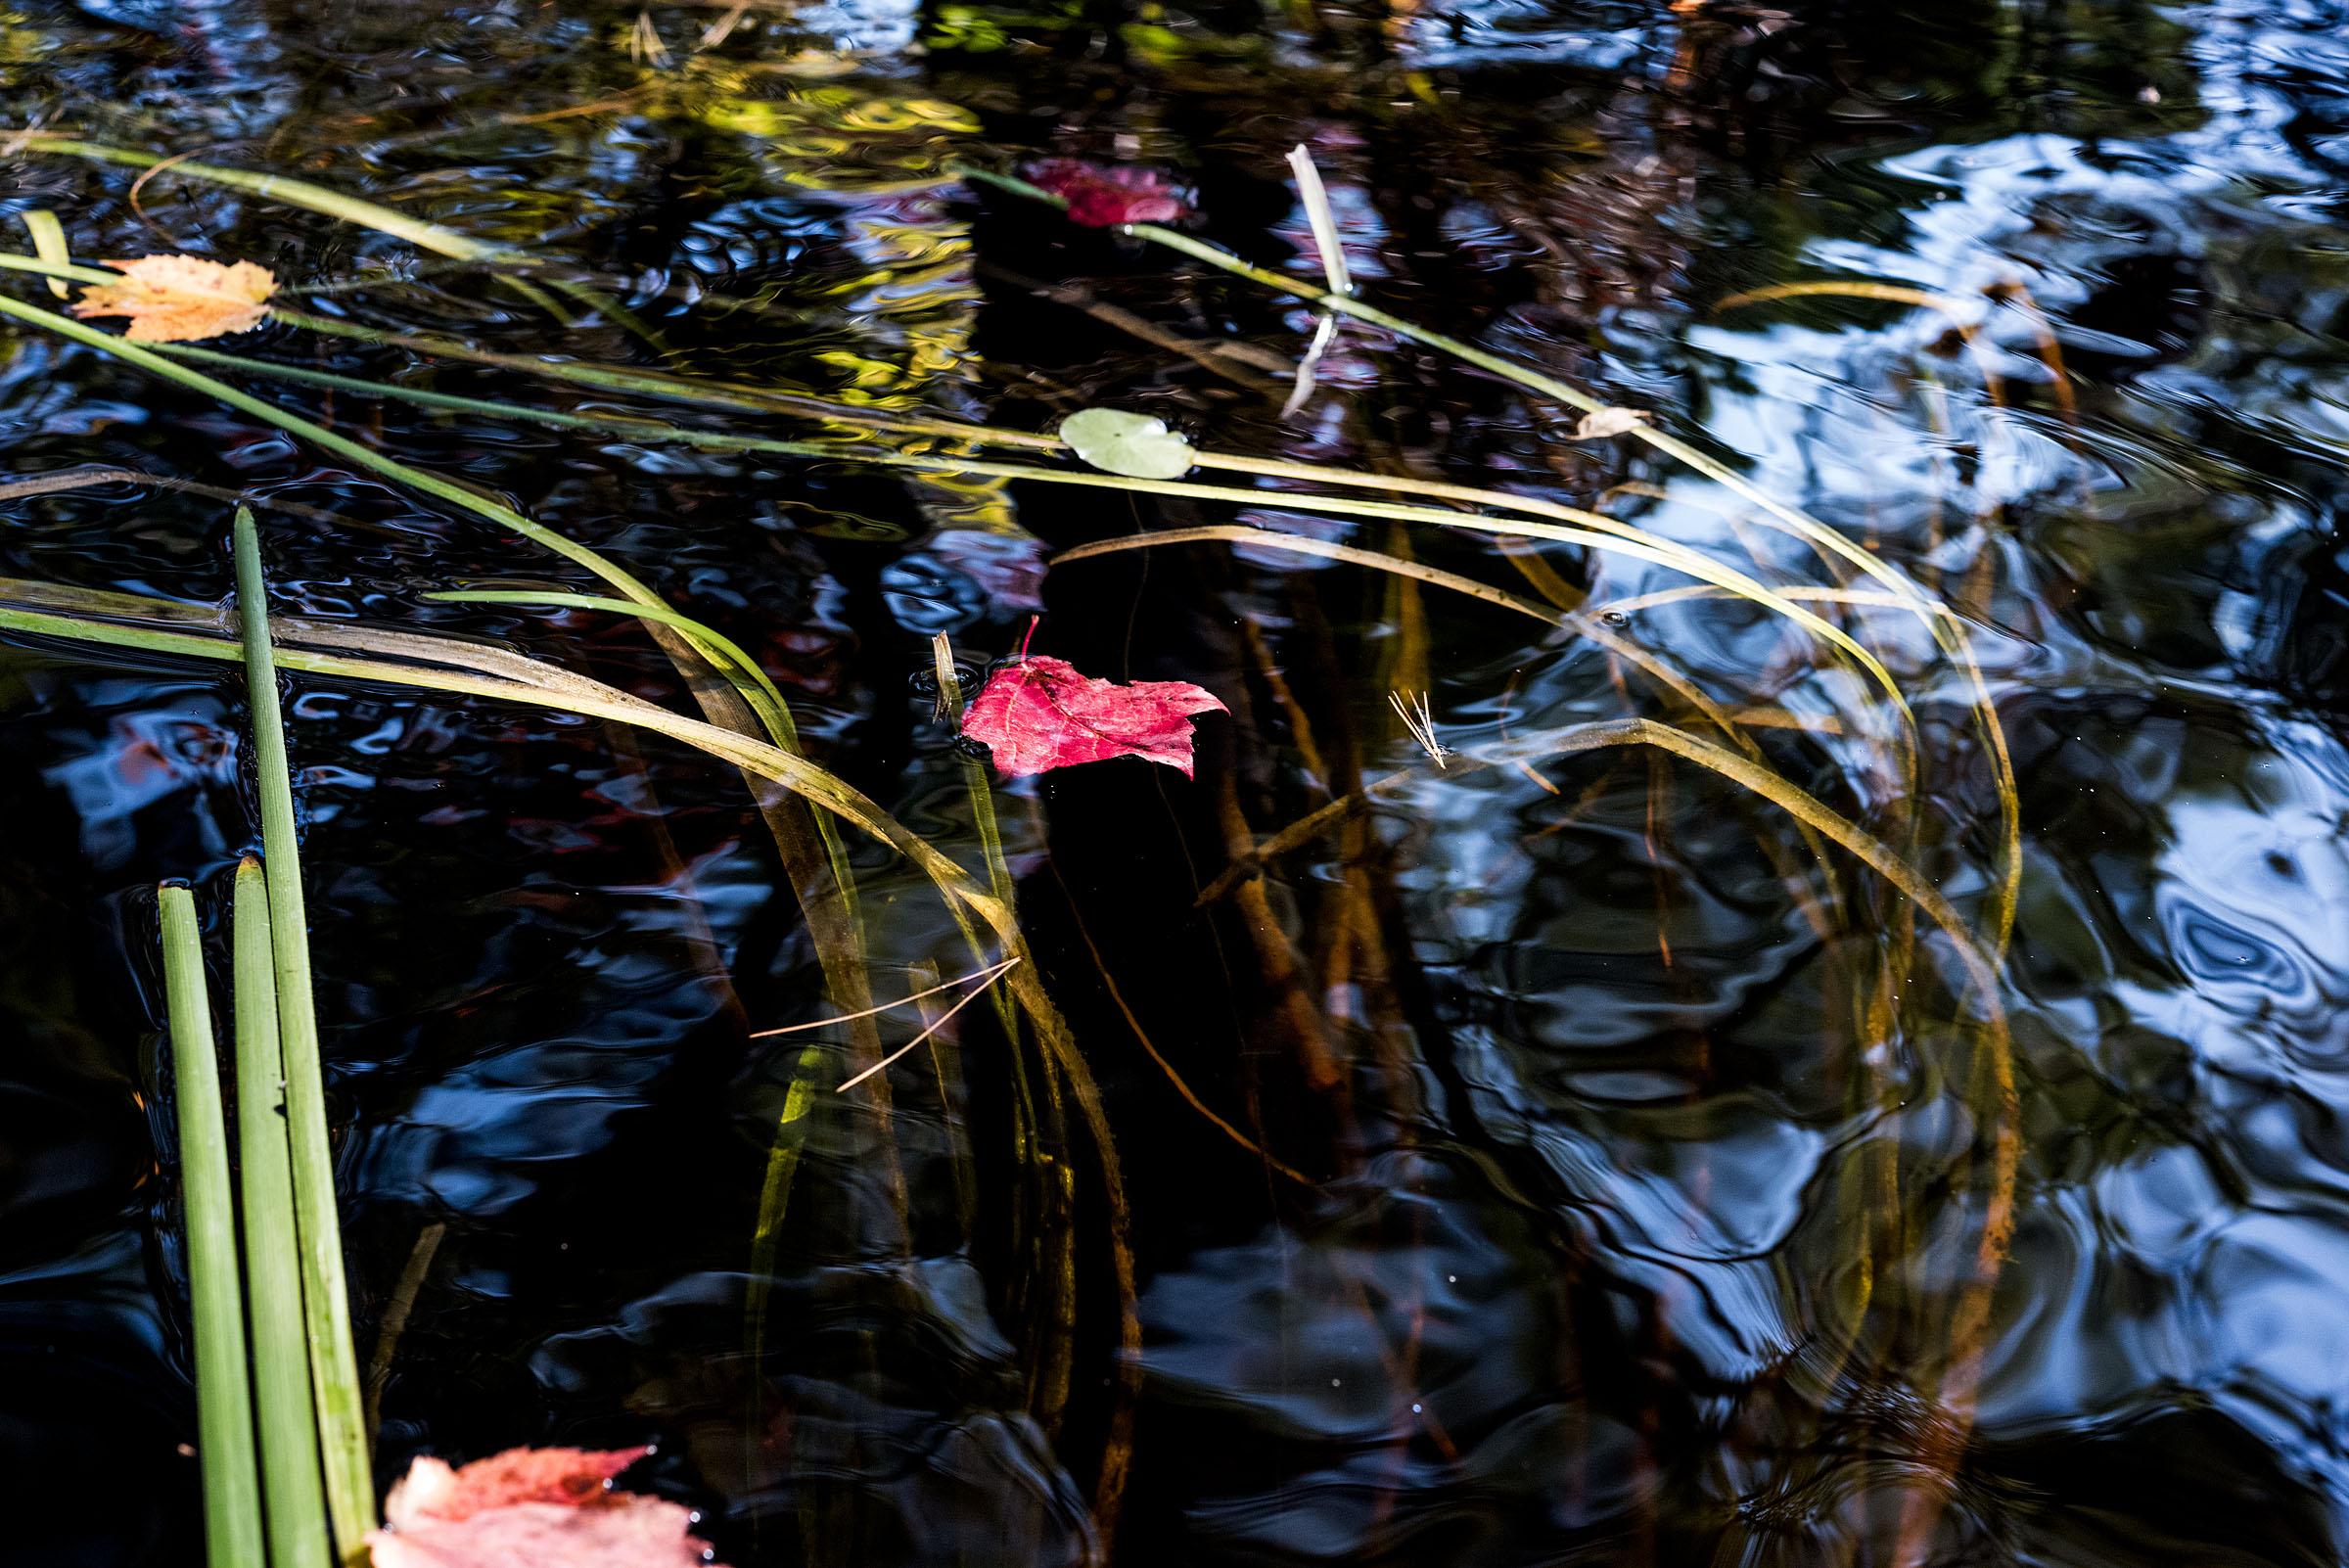 Sage Sohier Abstract Photograph - Lily Pads, Photograph, Abstract Landscape, Reflections on New Hampshire Pond